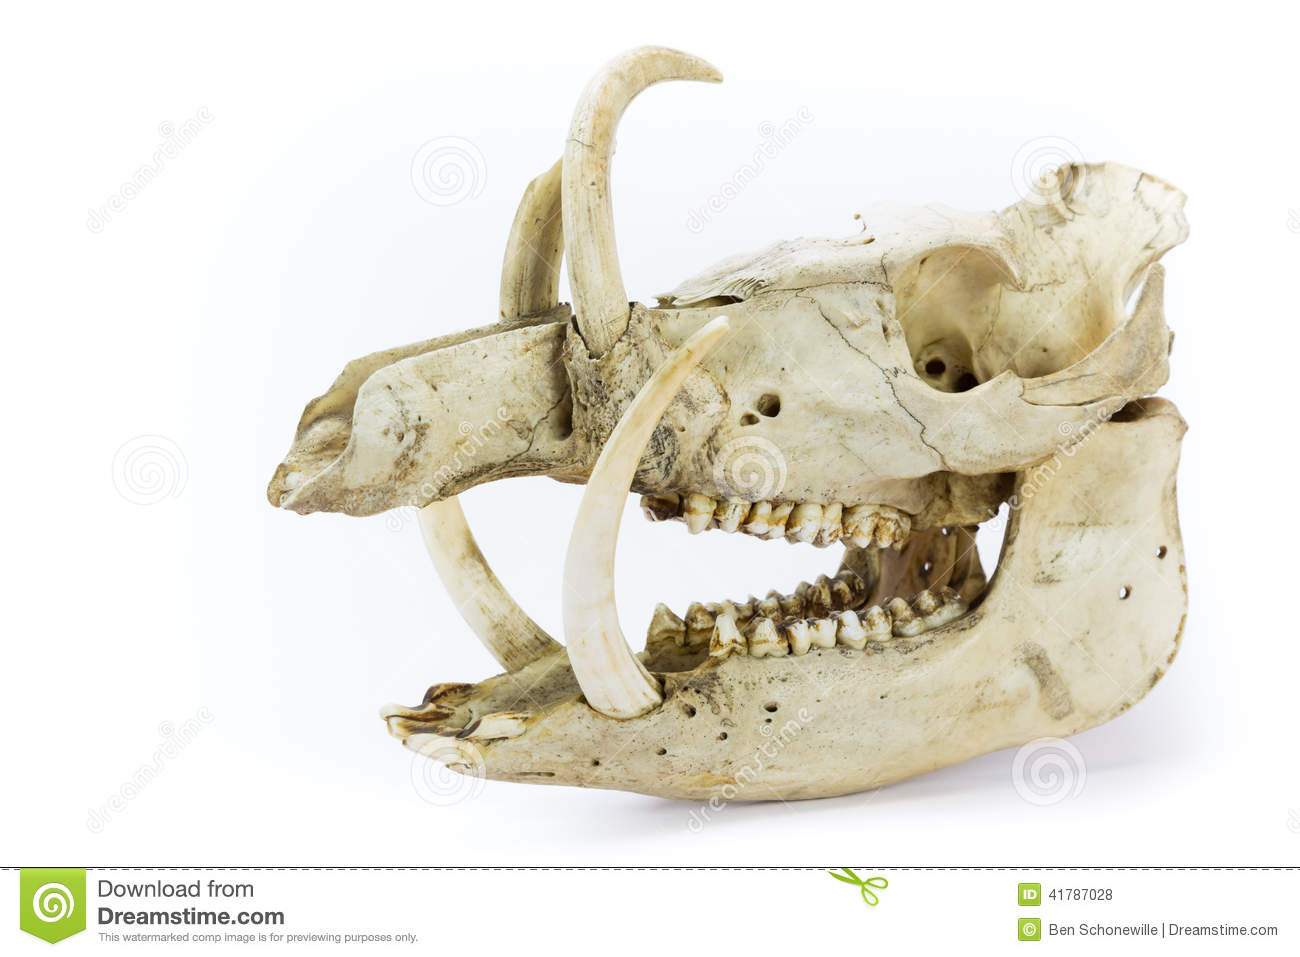 Skull Of Wild Pig With Long Teeth On White Background 